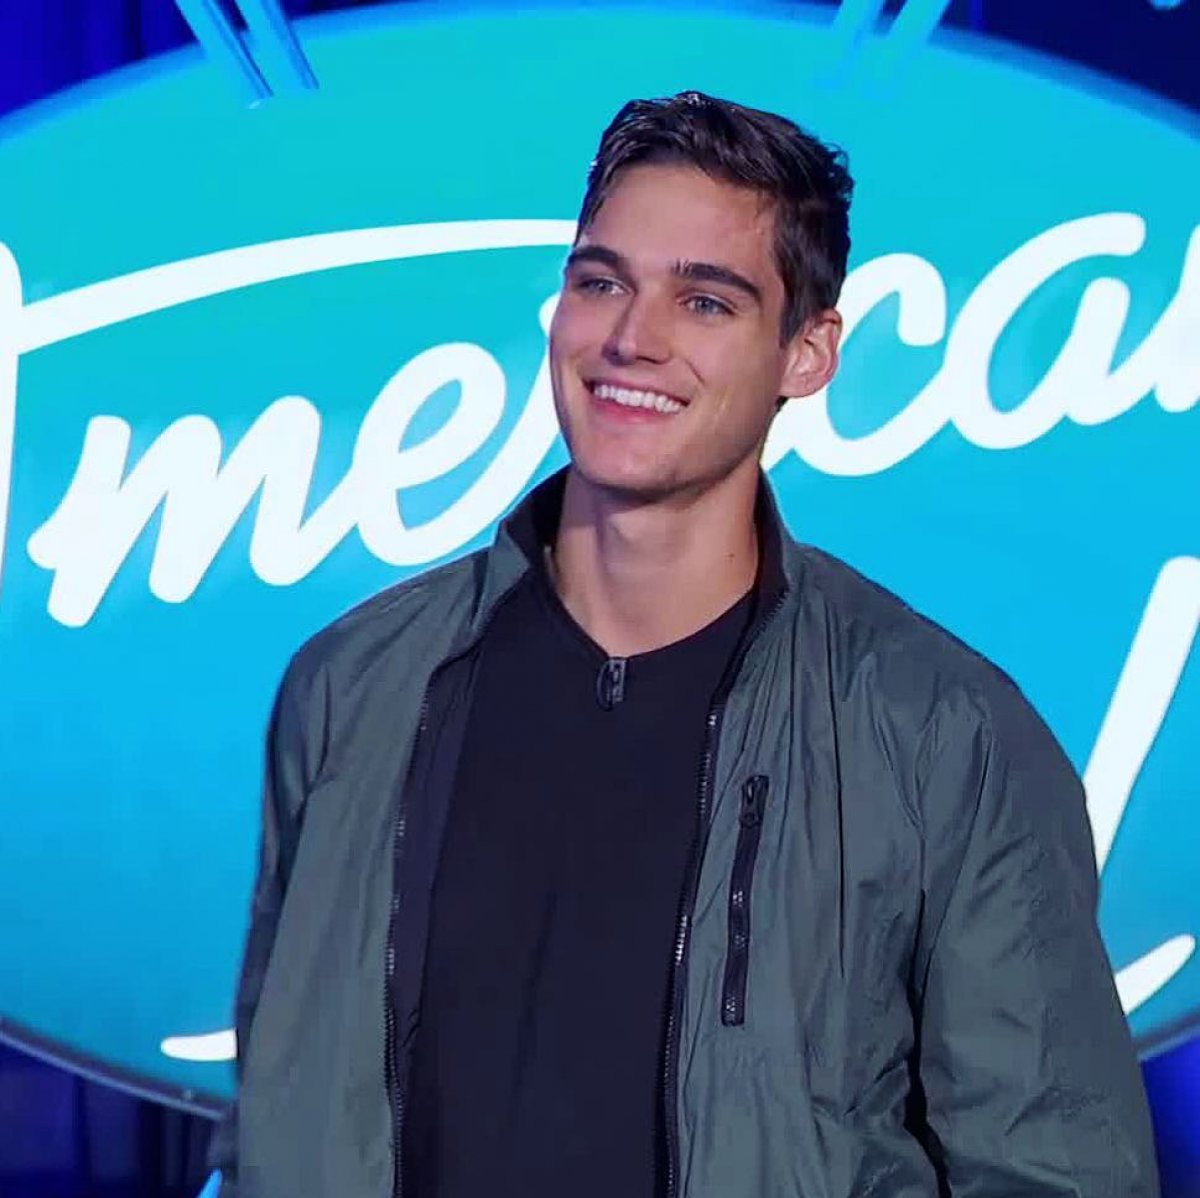 'American Idol' recap: Auditions come to a close with 9 artists going to Hollywood ...